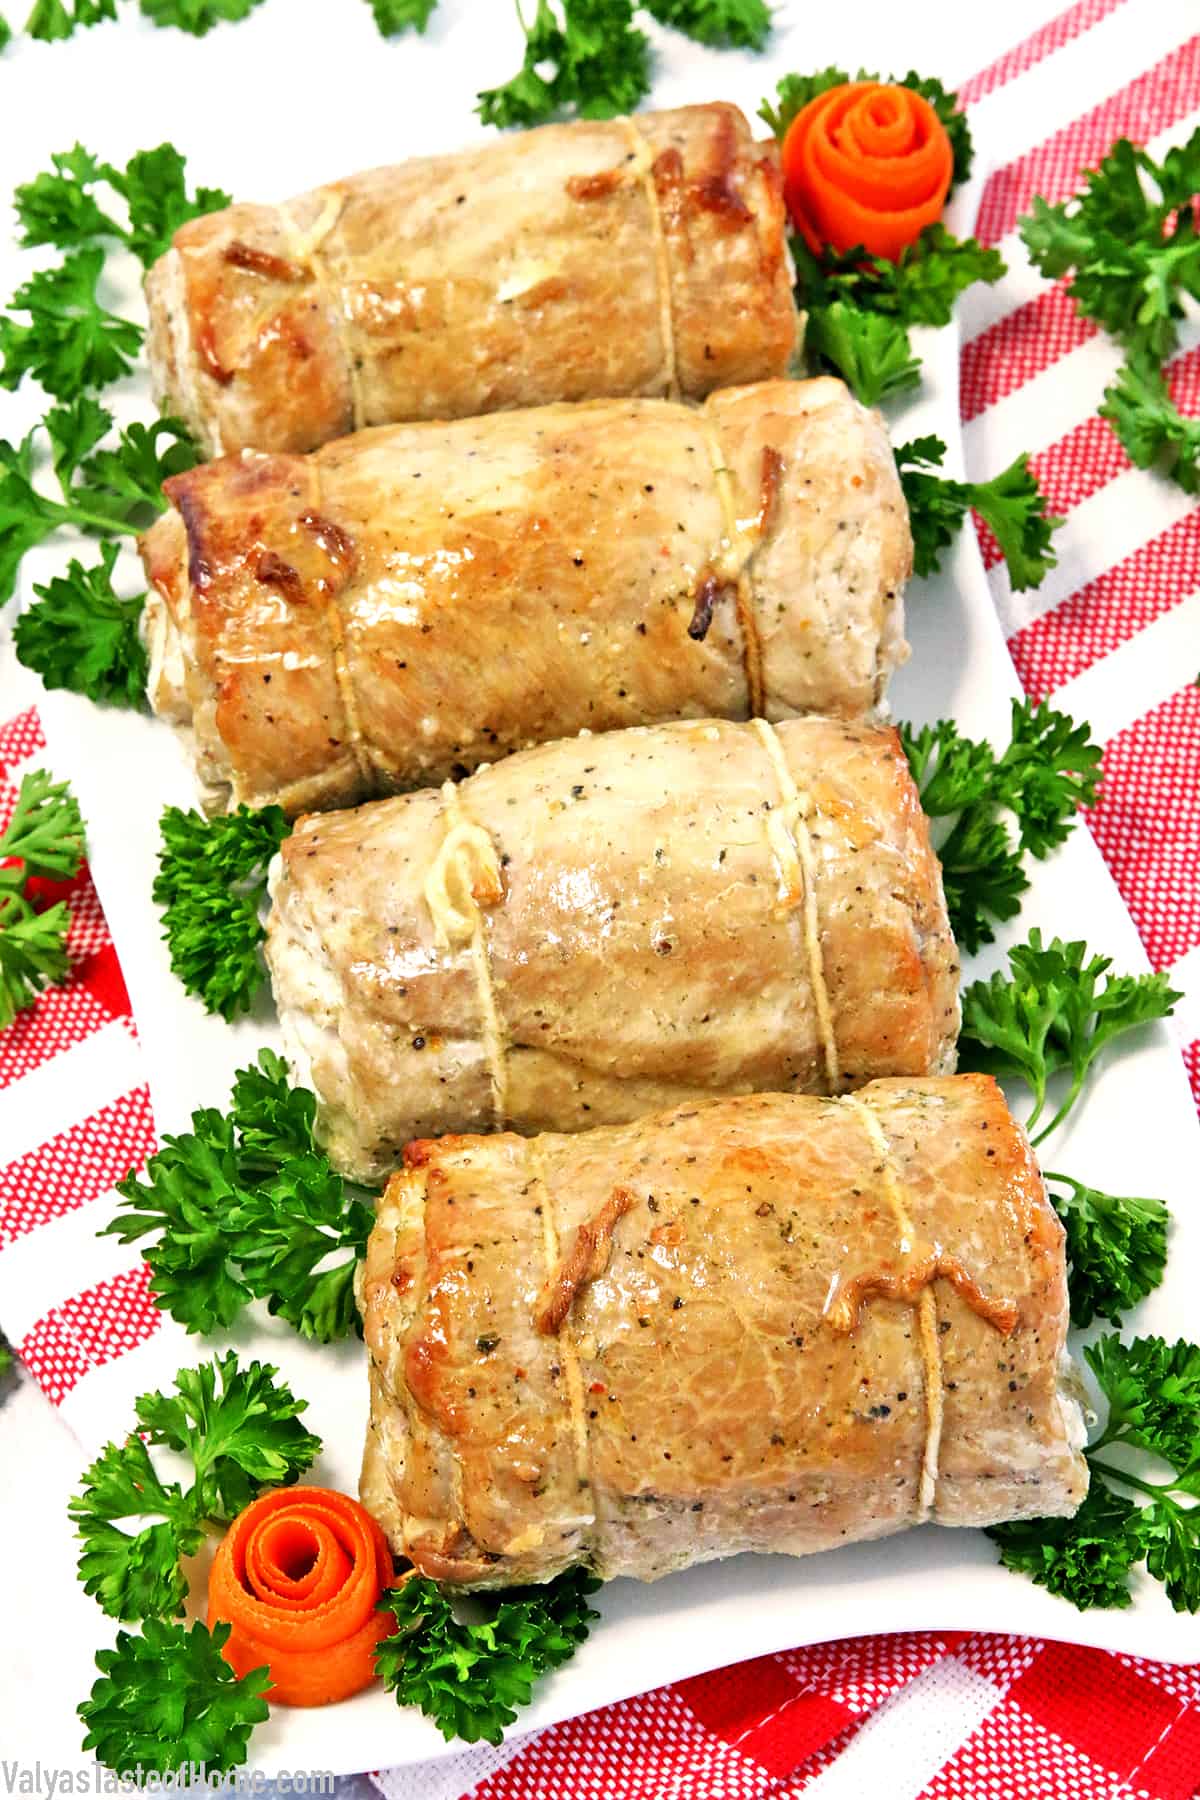 This Pork Meat Roulette is a fairly special traditional Ukrainian recipe that is usually passed down in the family and mostly brought out for special occasions. It is unique, scrumptious and perfect for your Christmas dinner! 